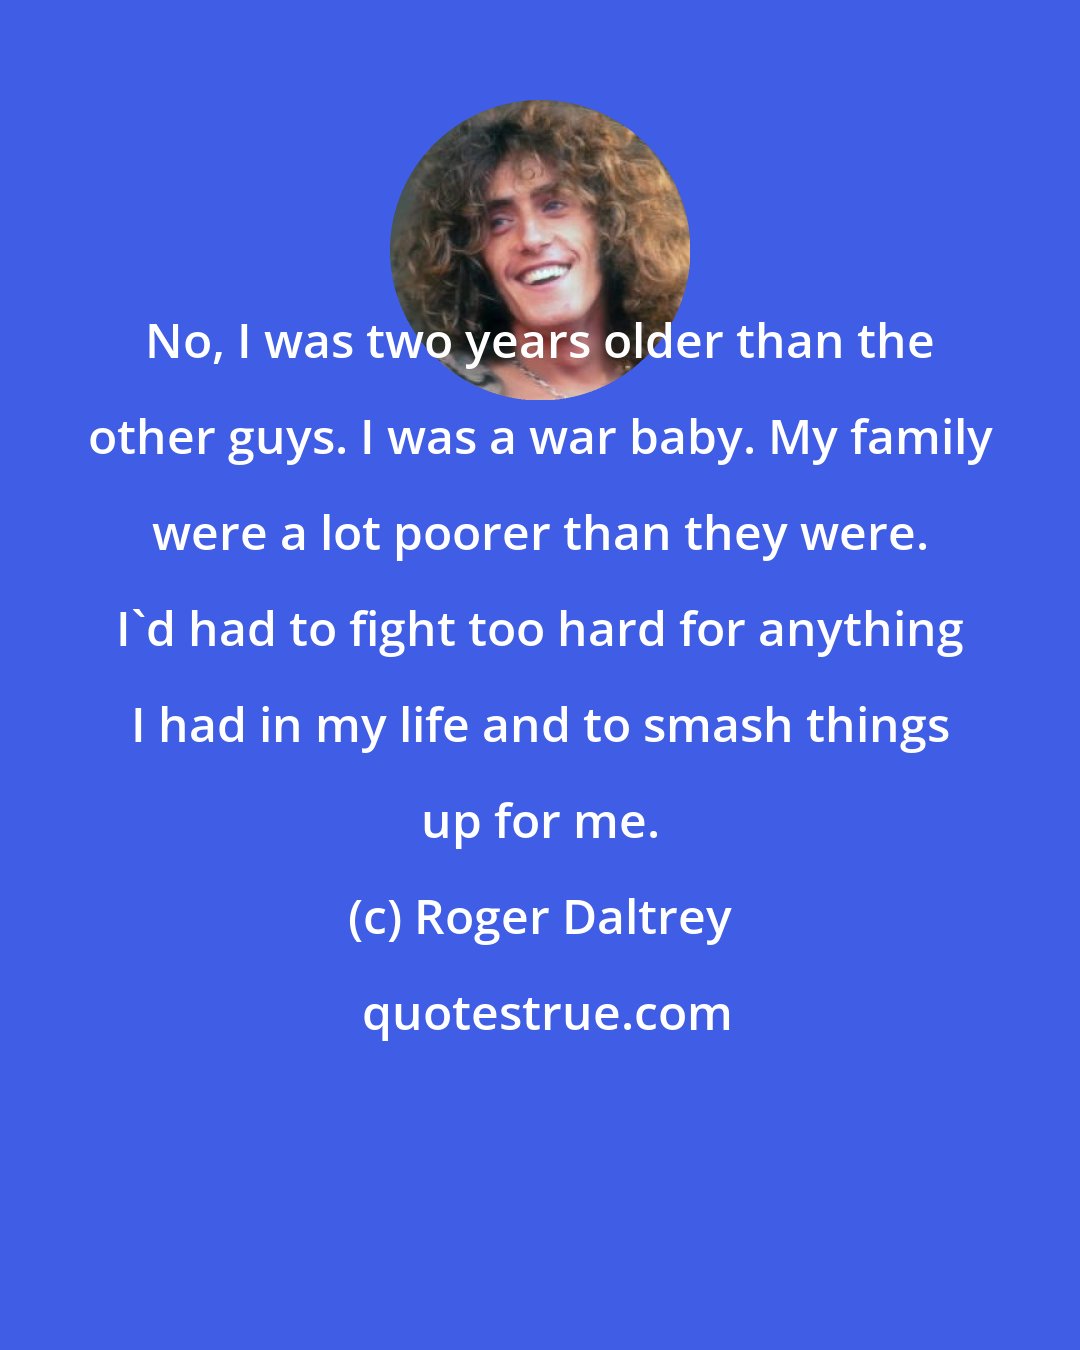 Roger Daltrey: No, I was two years older than the other guys. I was a war baby. My family were a lot poorer than they were. I'd had to fight too hard for anything I had in my life and to smash things up for me.